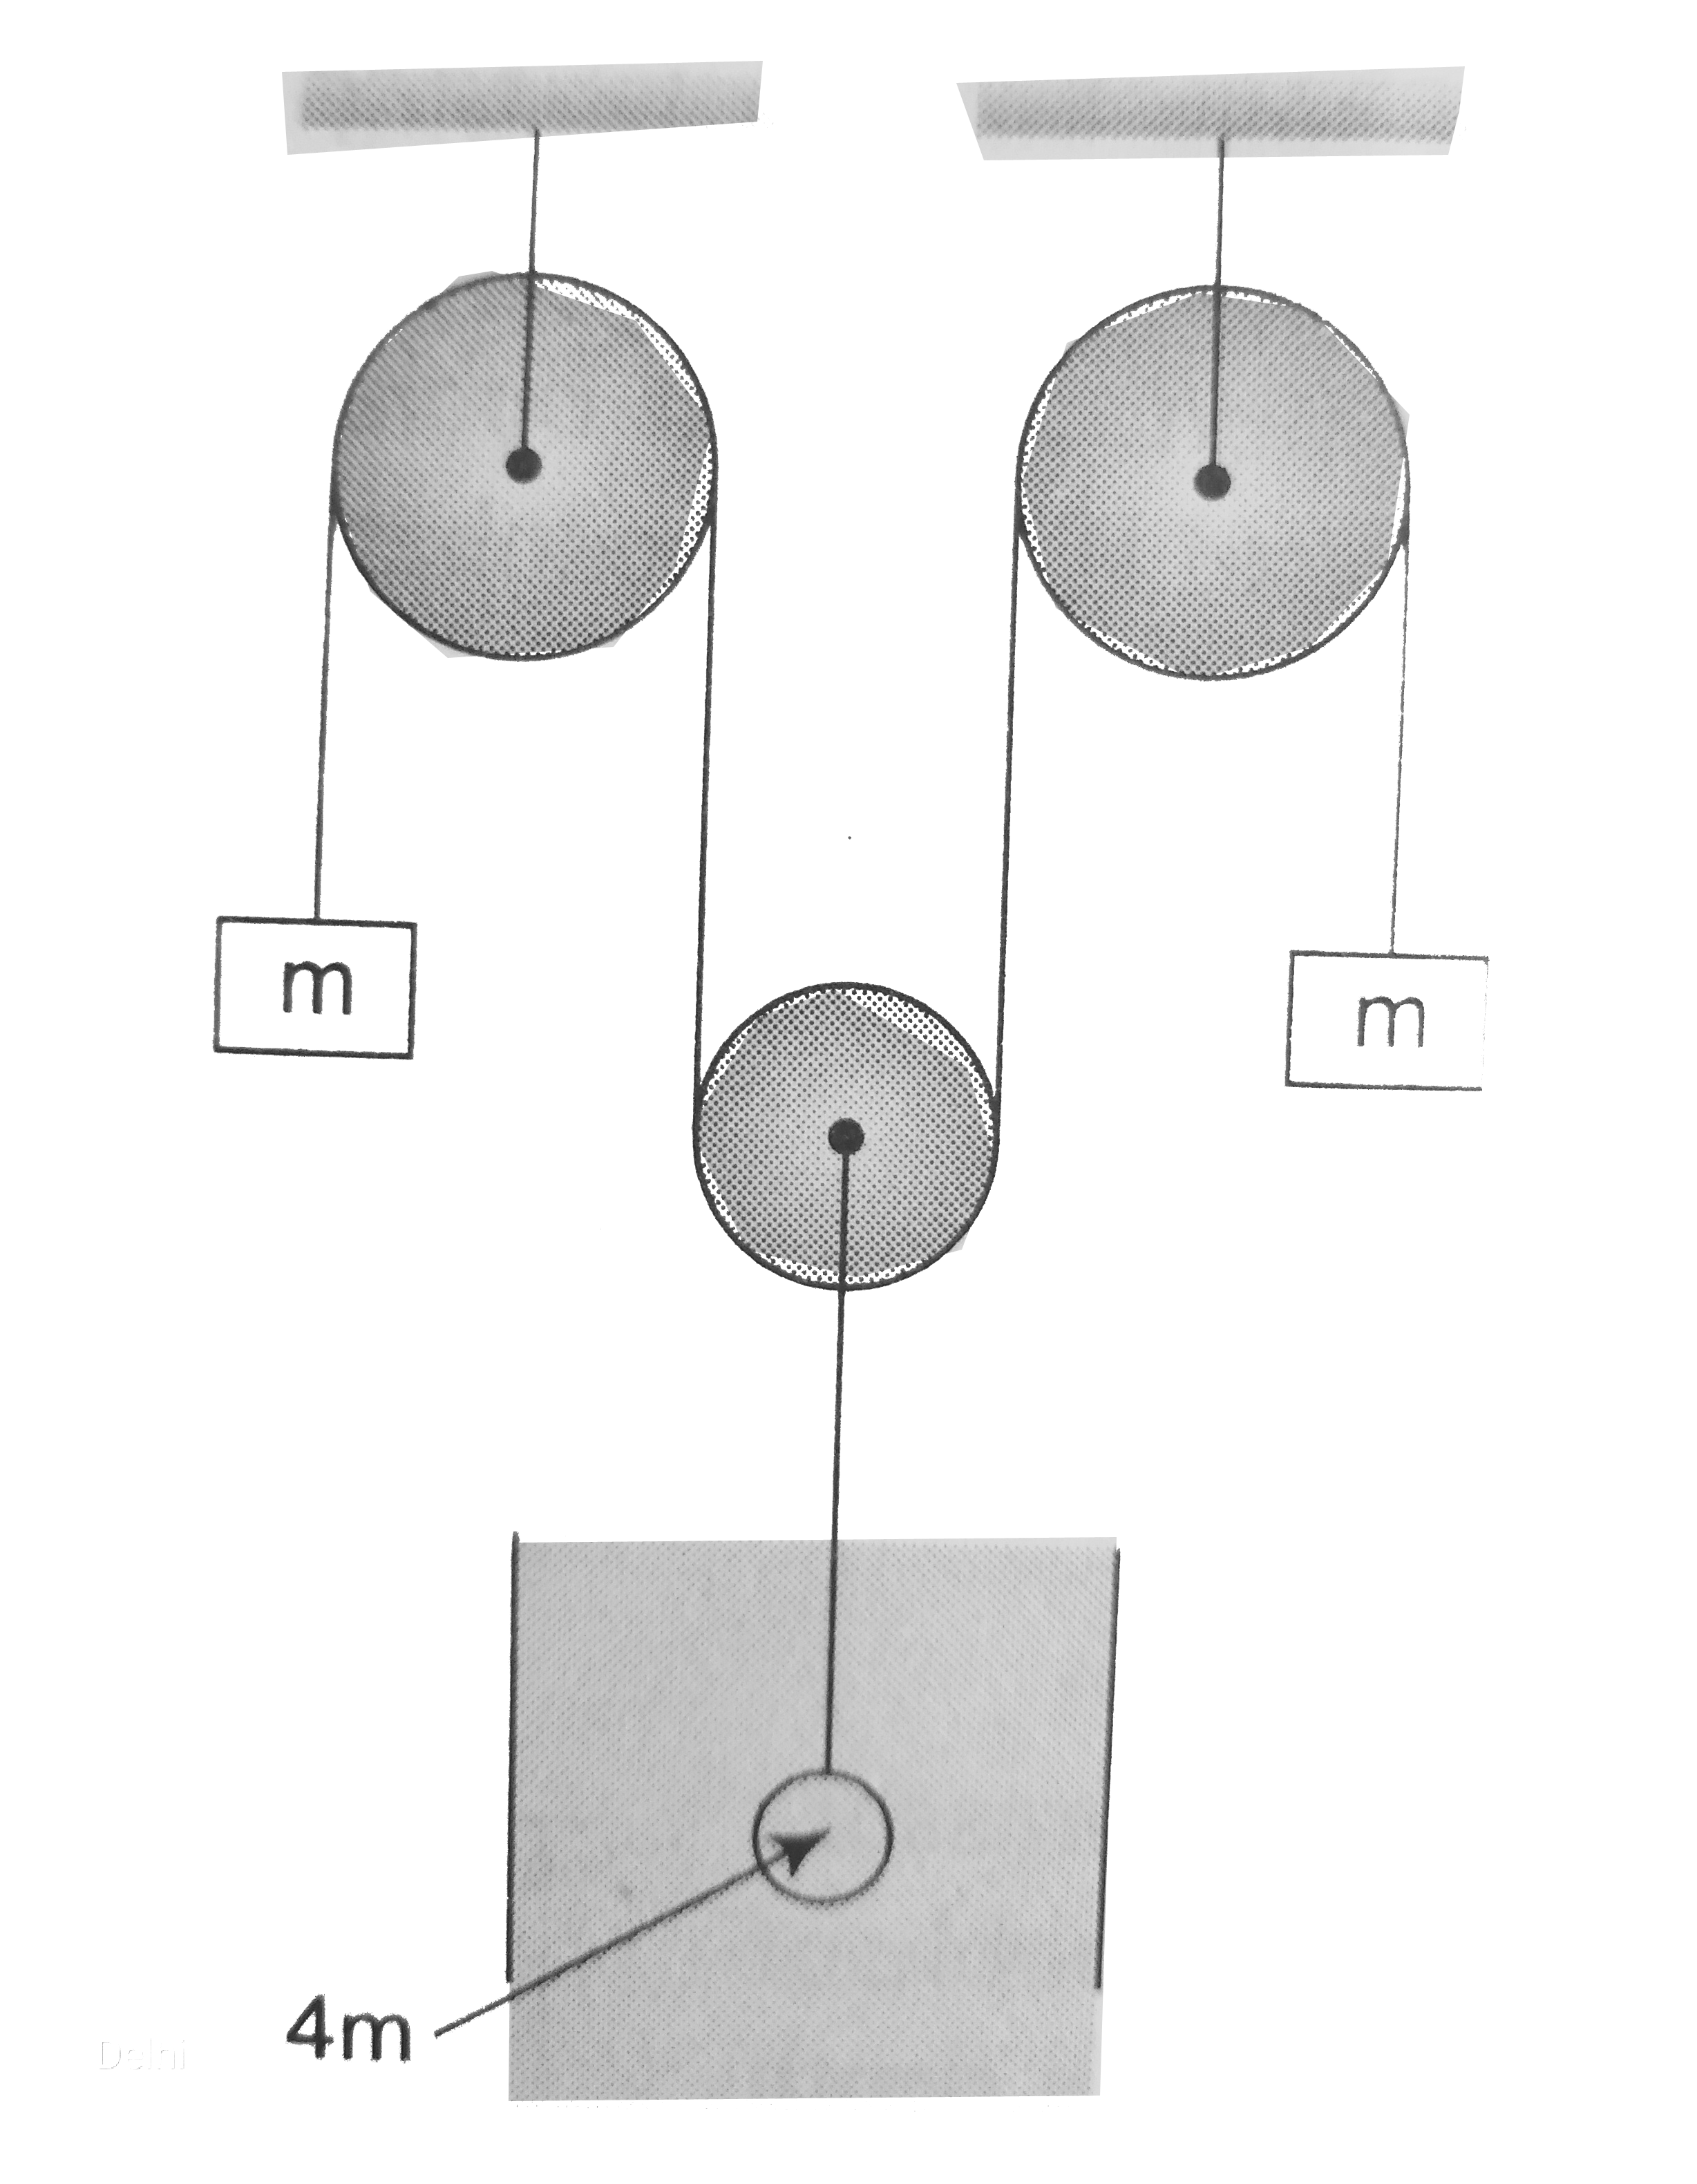 A spherical ball of mass 4m, density sigma and radius r is attached to a pulley-mass system as shown in figure. The ball is released in a liquid of coefficient of viscosity eta and density rho(lt(sigma)/(2)). If the length of the liquid column is sufficiently long, the terminal velocity attained by the ball is given by (assume all pulleys to be massless and string as massless and inextensible):